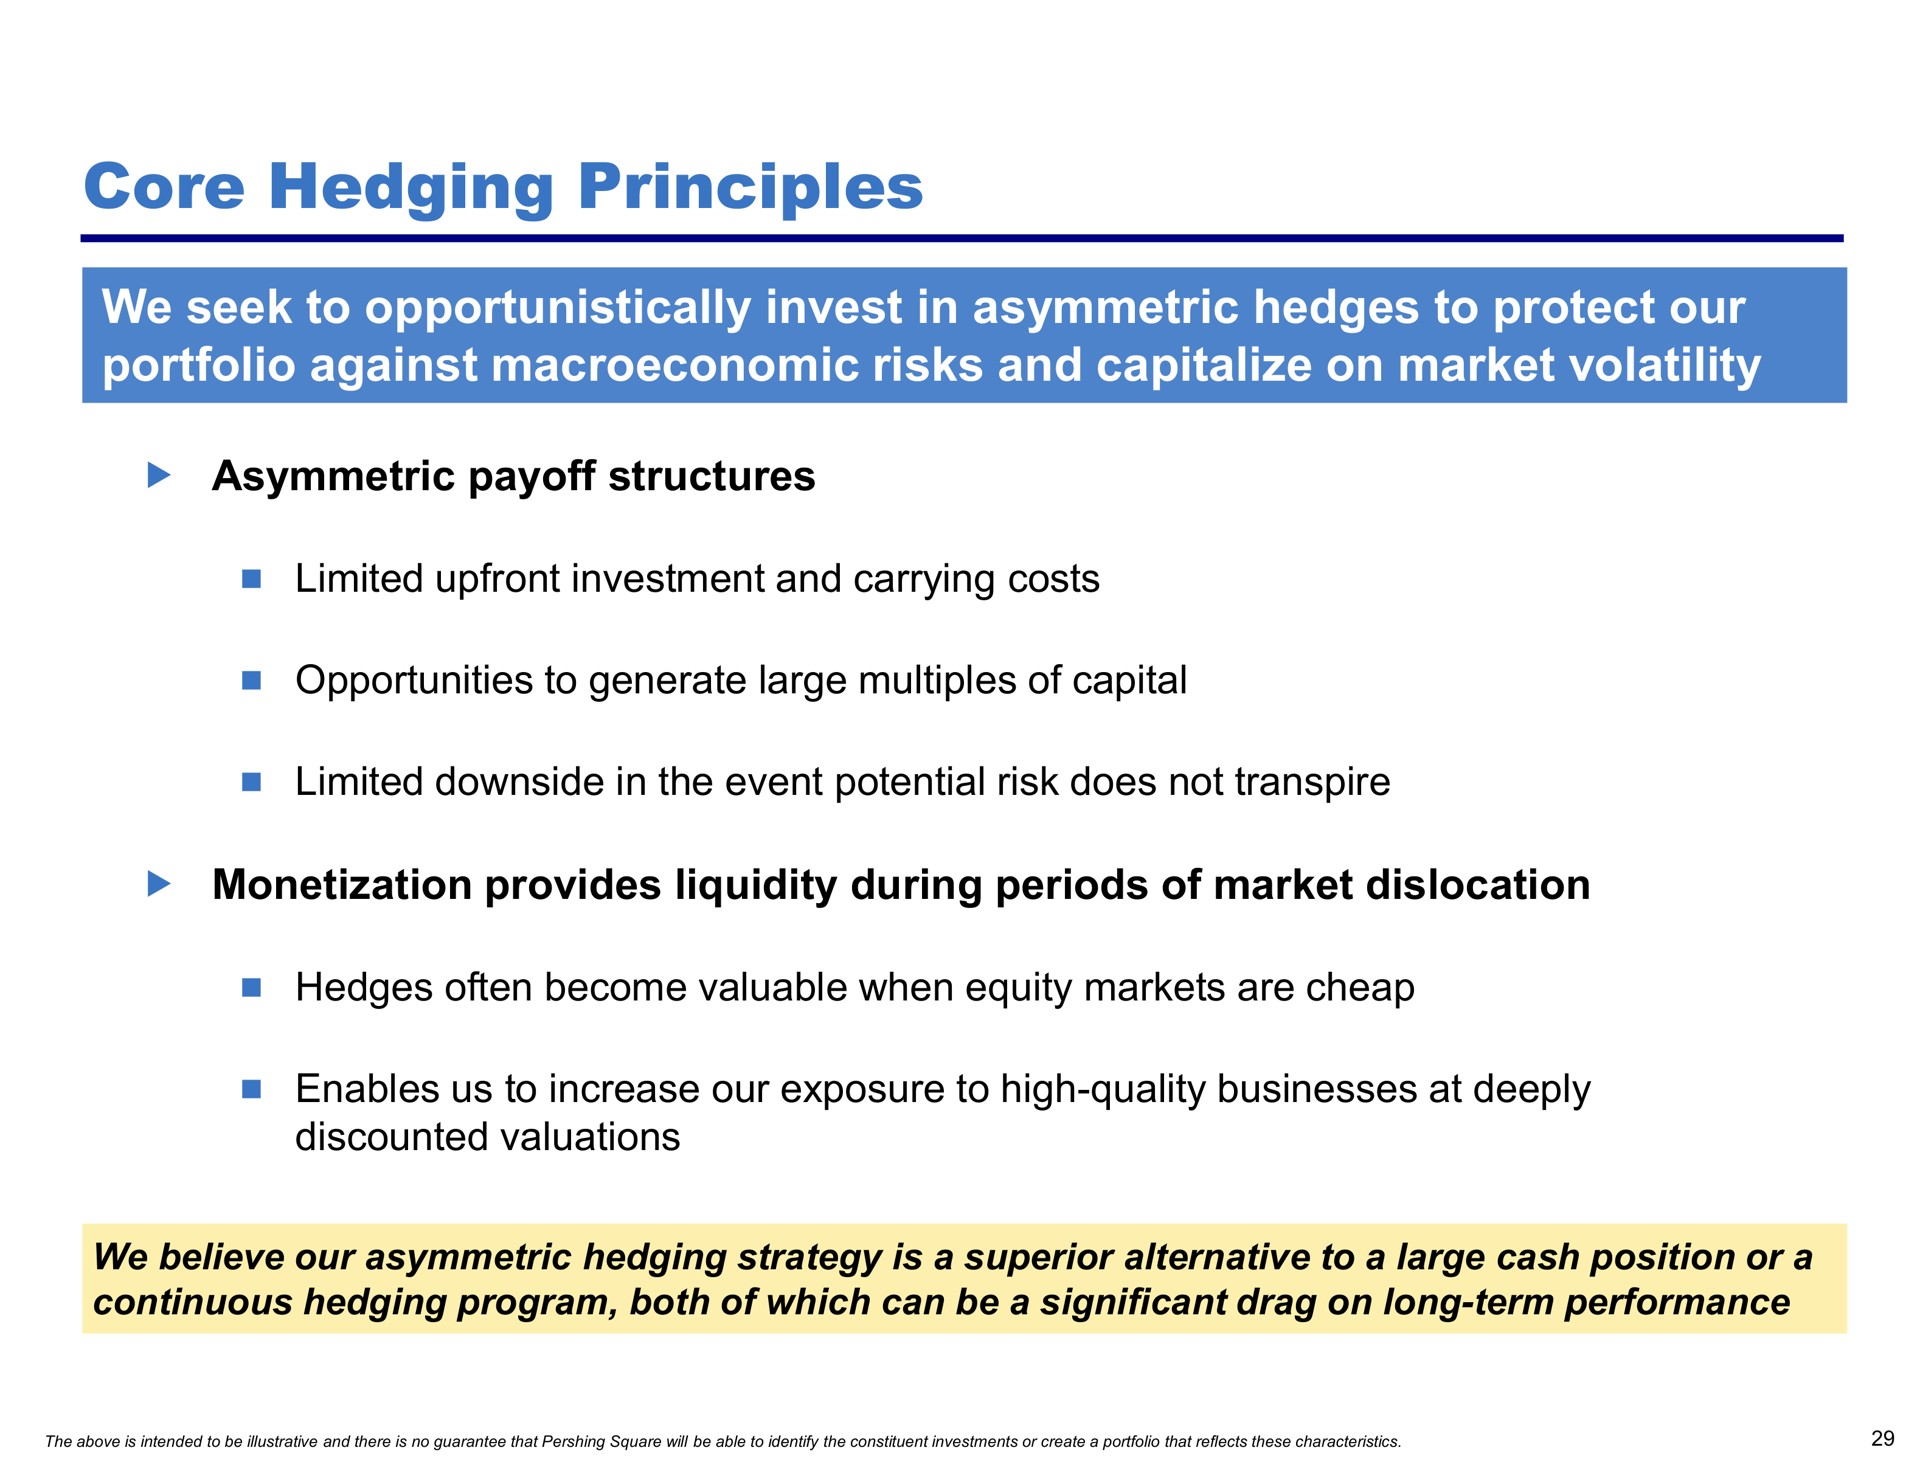 core hedging principles we seek to opportunistically invest in asymmetric hedges to protect our portfolio against risks and capitalize on market volatility | Pershing Square